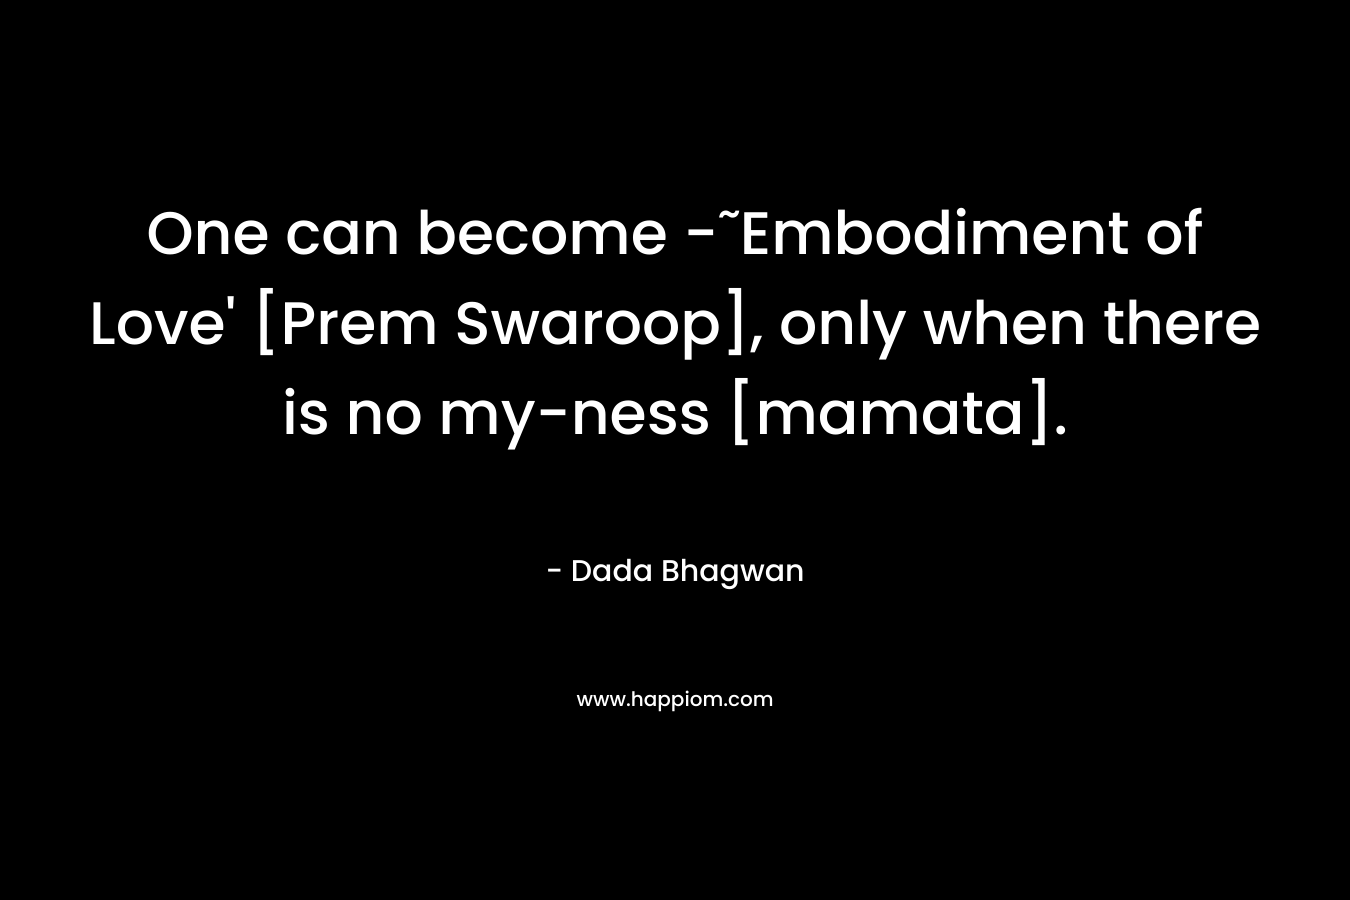 One can become -˜Embodiment of Love’ [Prem Swaroop], only when there is no my-ness [mamata]. – Dada Bhagwan